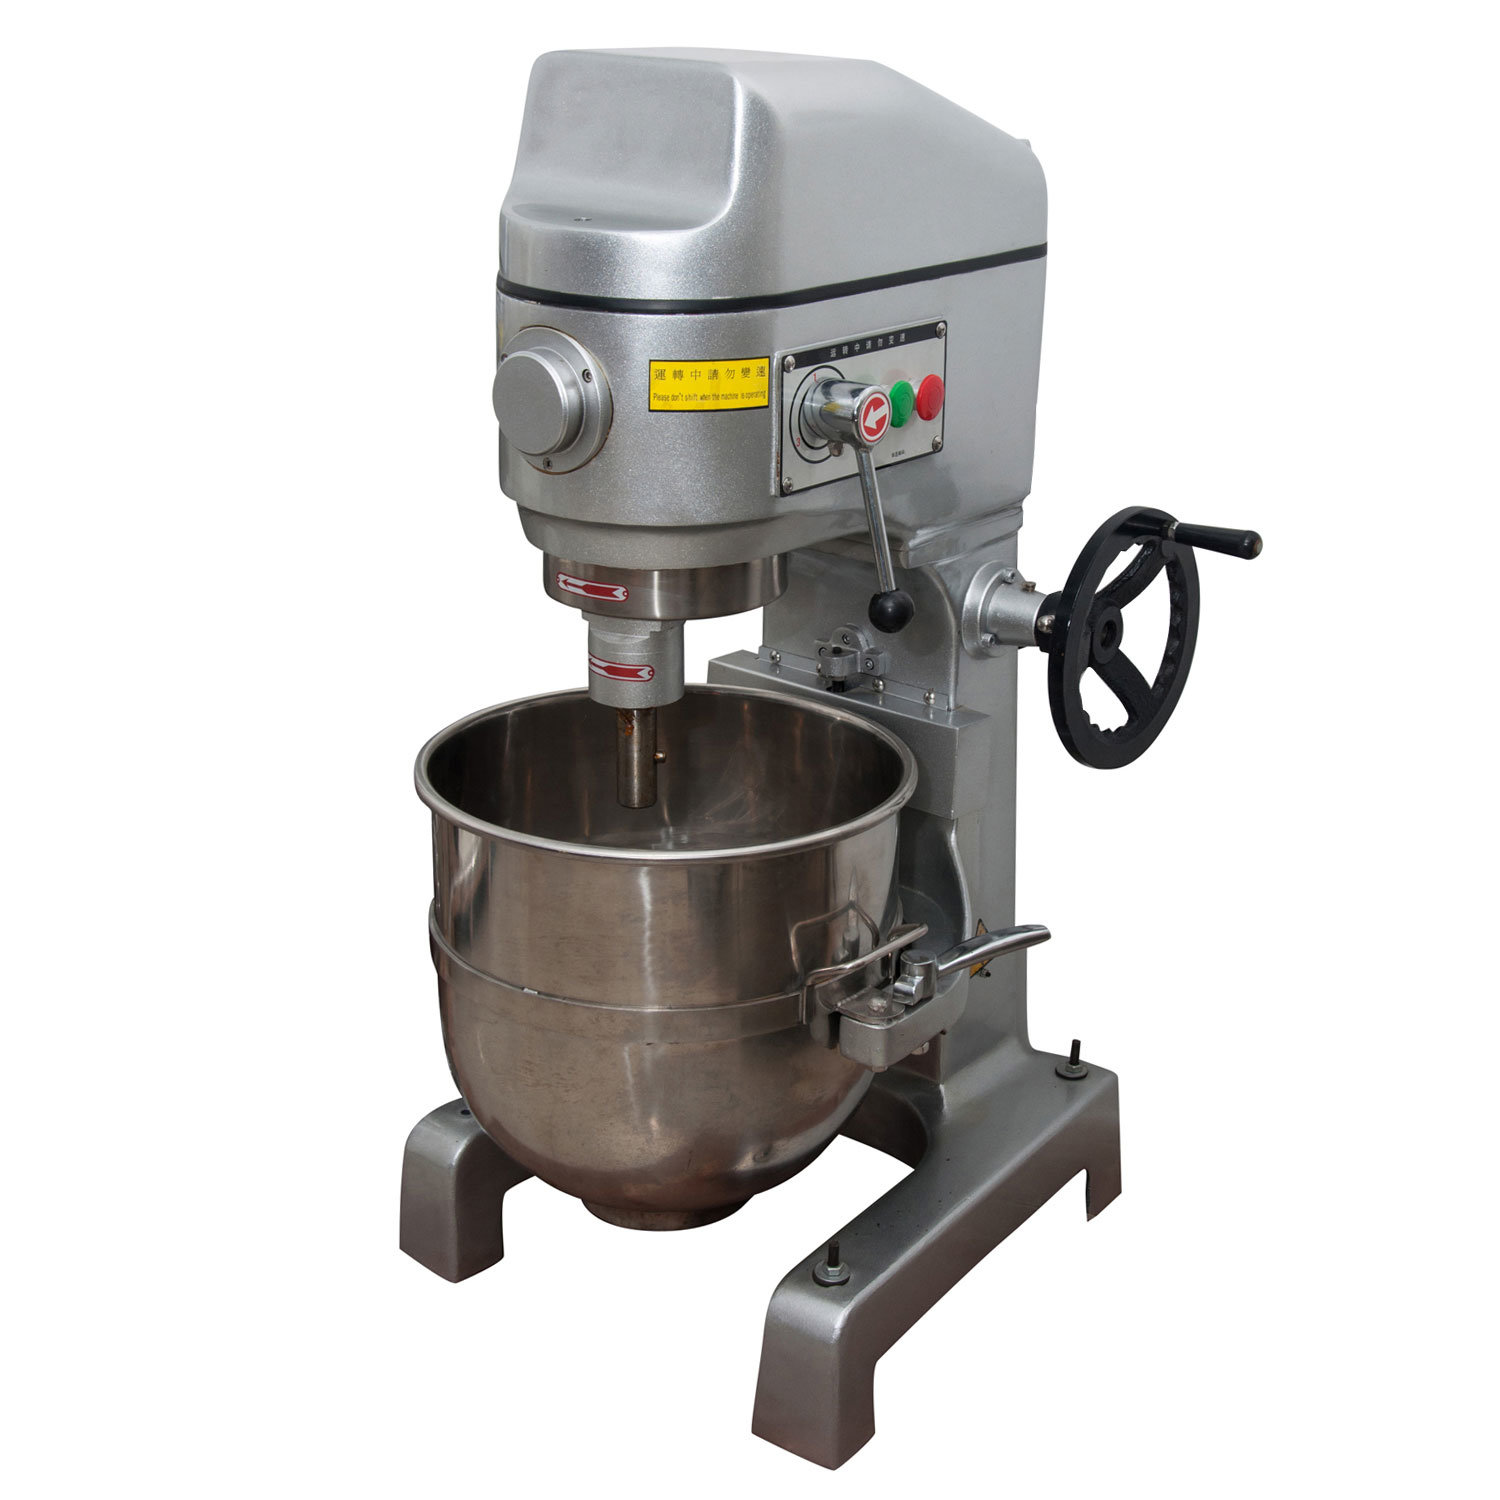 CE Approval Cake Mixer